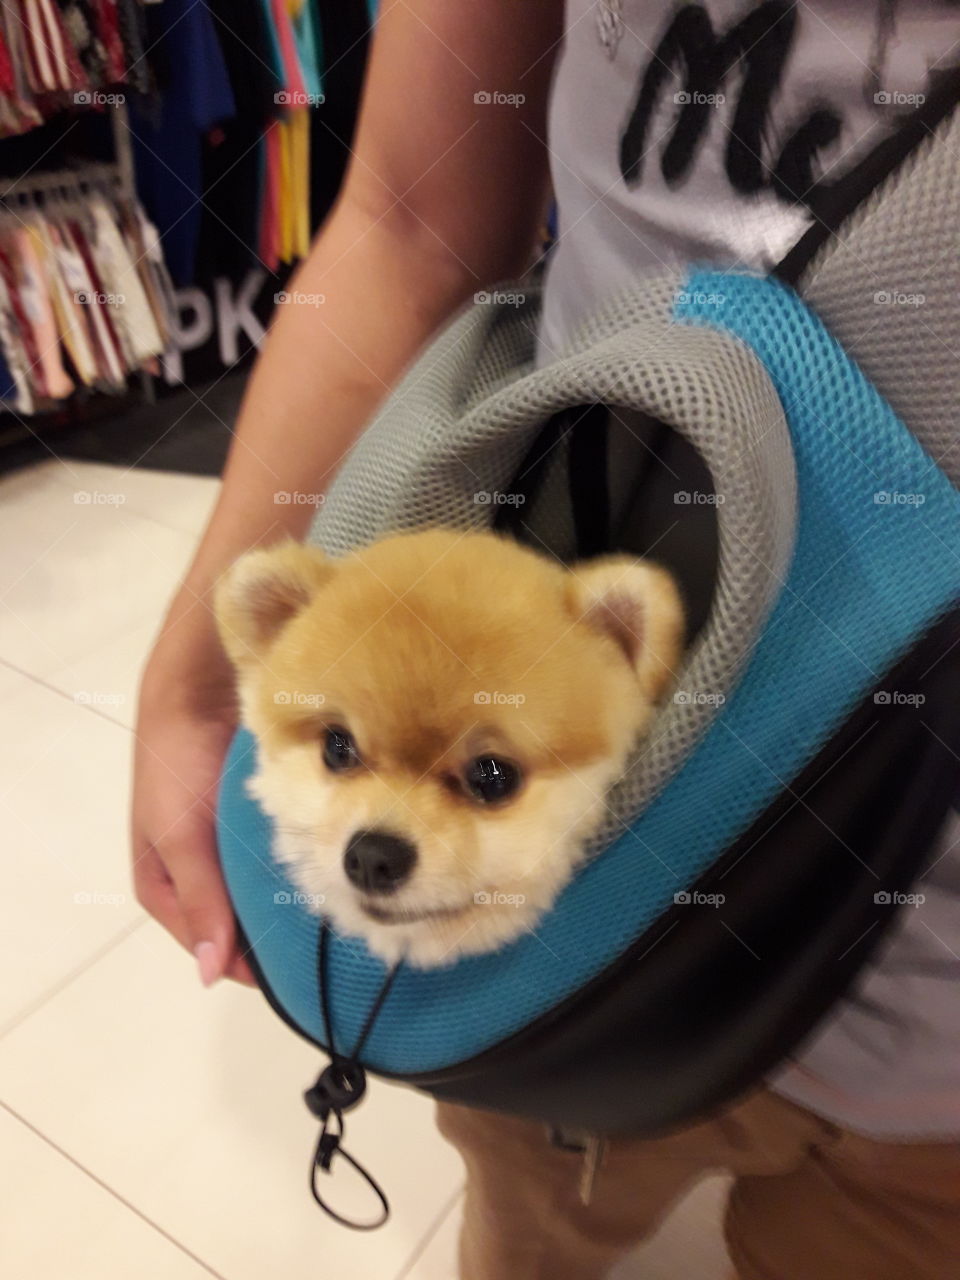 the head of tea cup dog "pomeranian" come out from the bag.